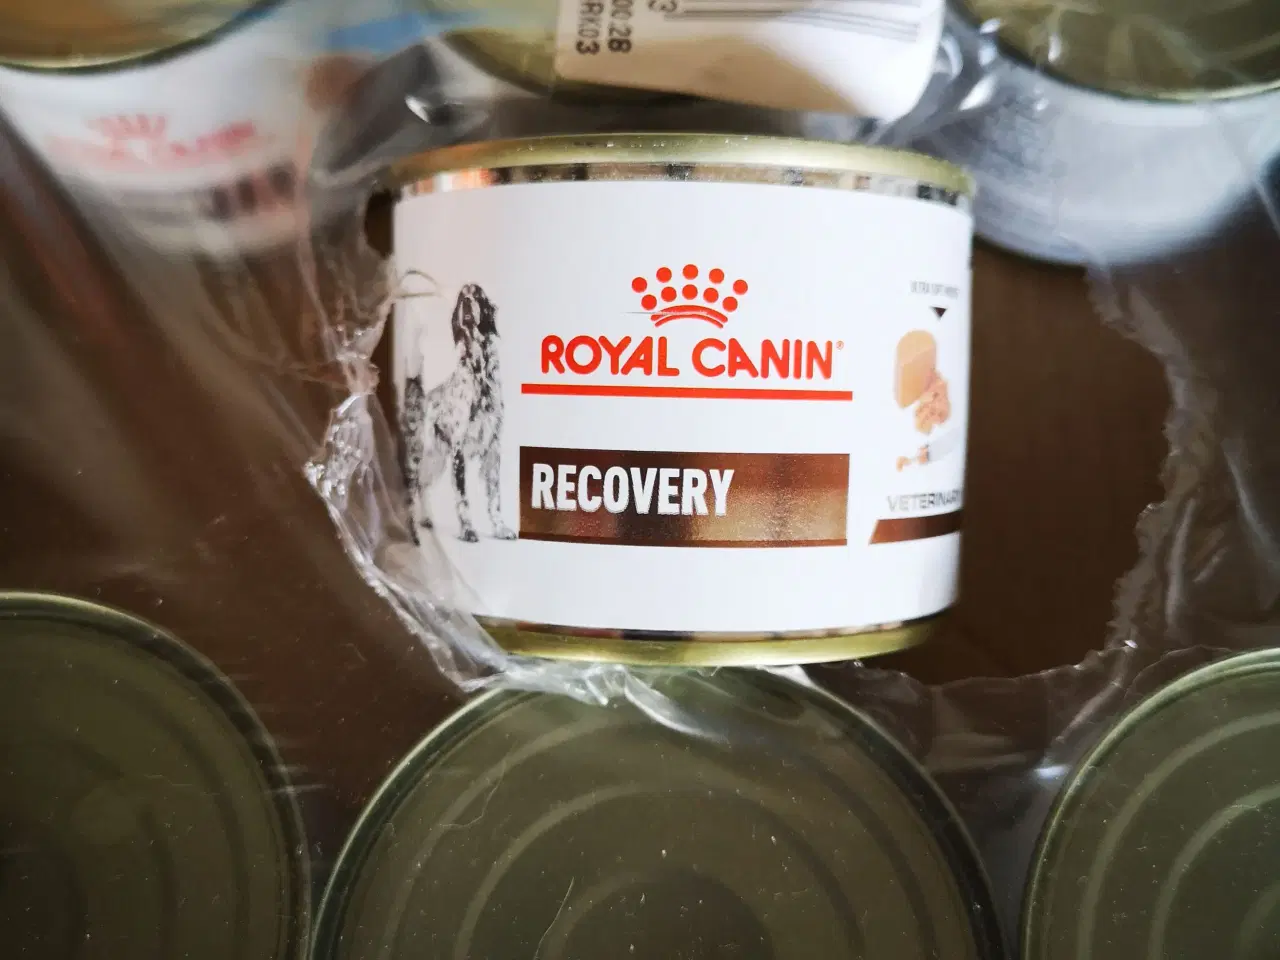 Billede 1 - Royal Canin Recovery, 10 ds. 